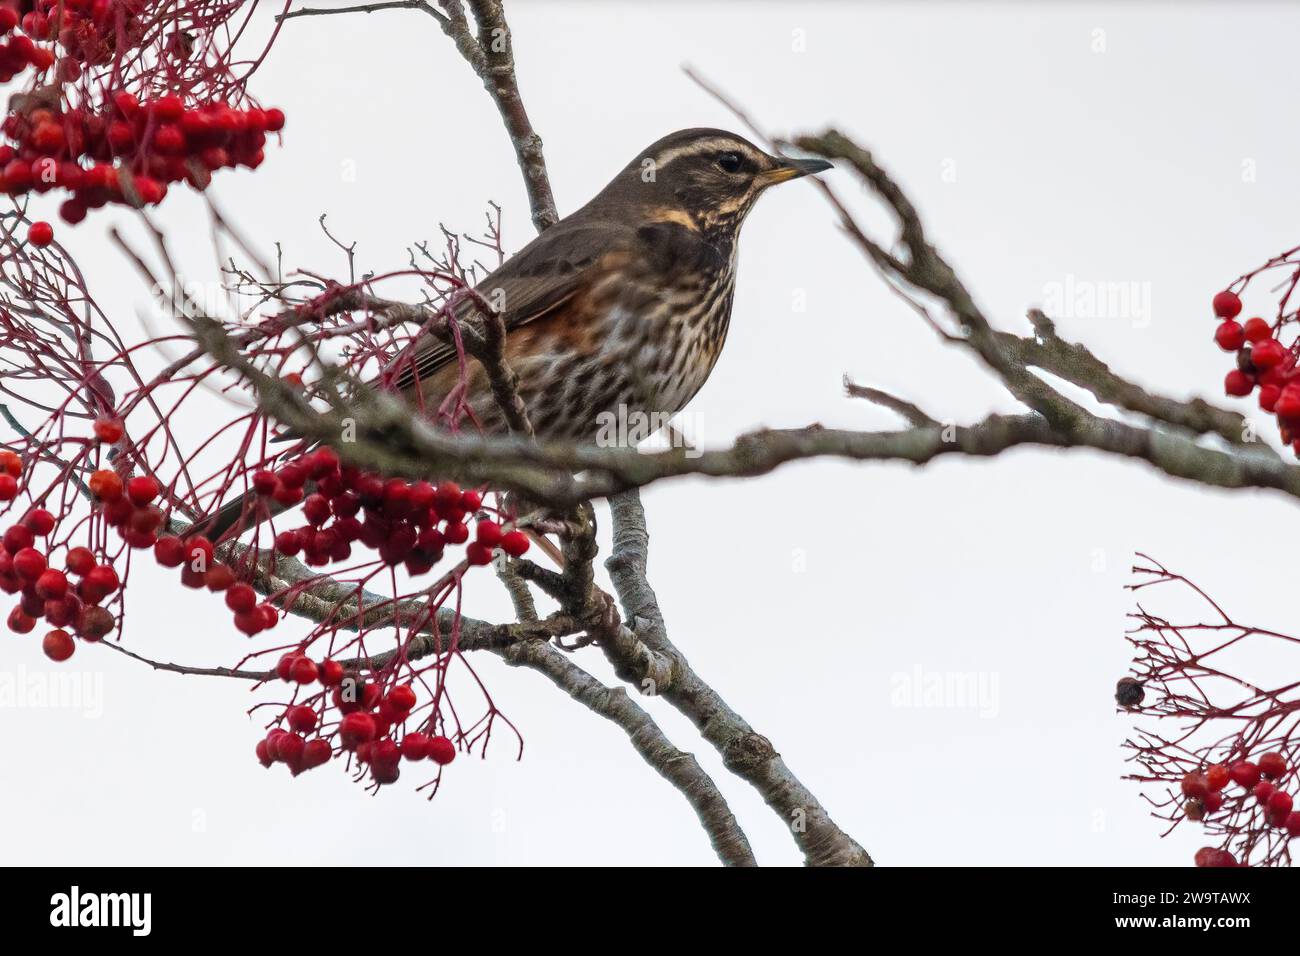 Redwing bird (Turdus iliacus) perched in a rowan tree among red berries in winter, England, UK Stock Photo